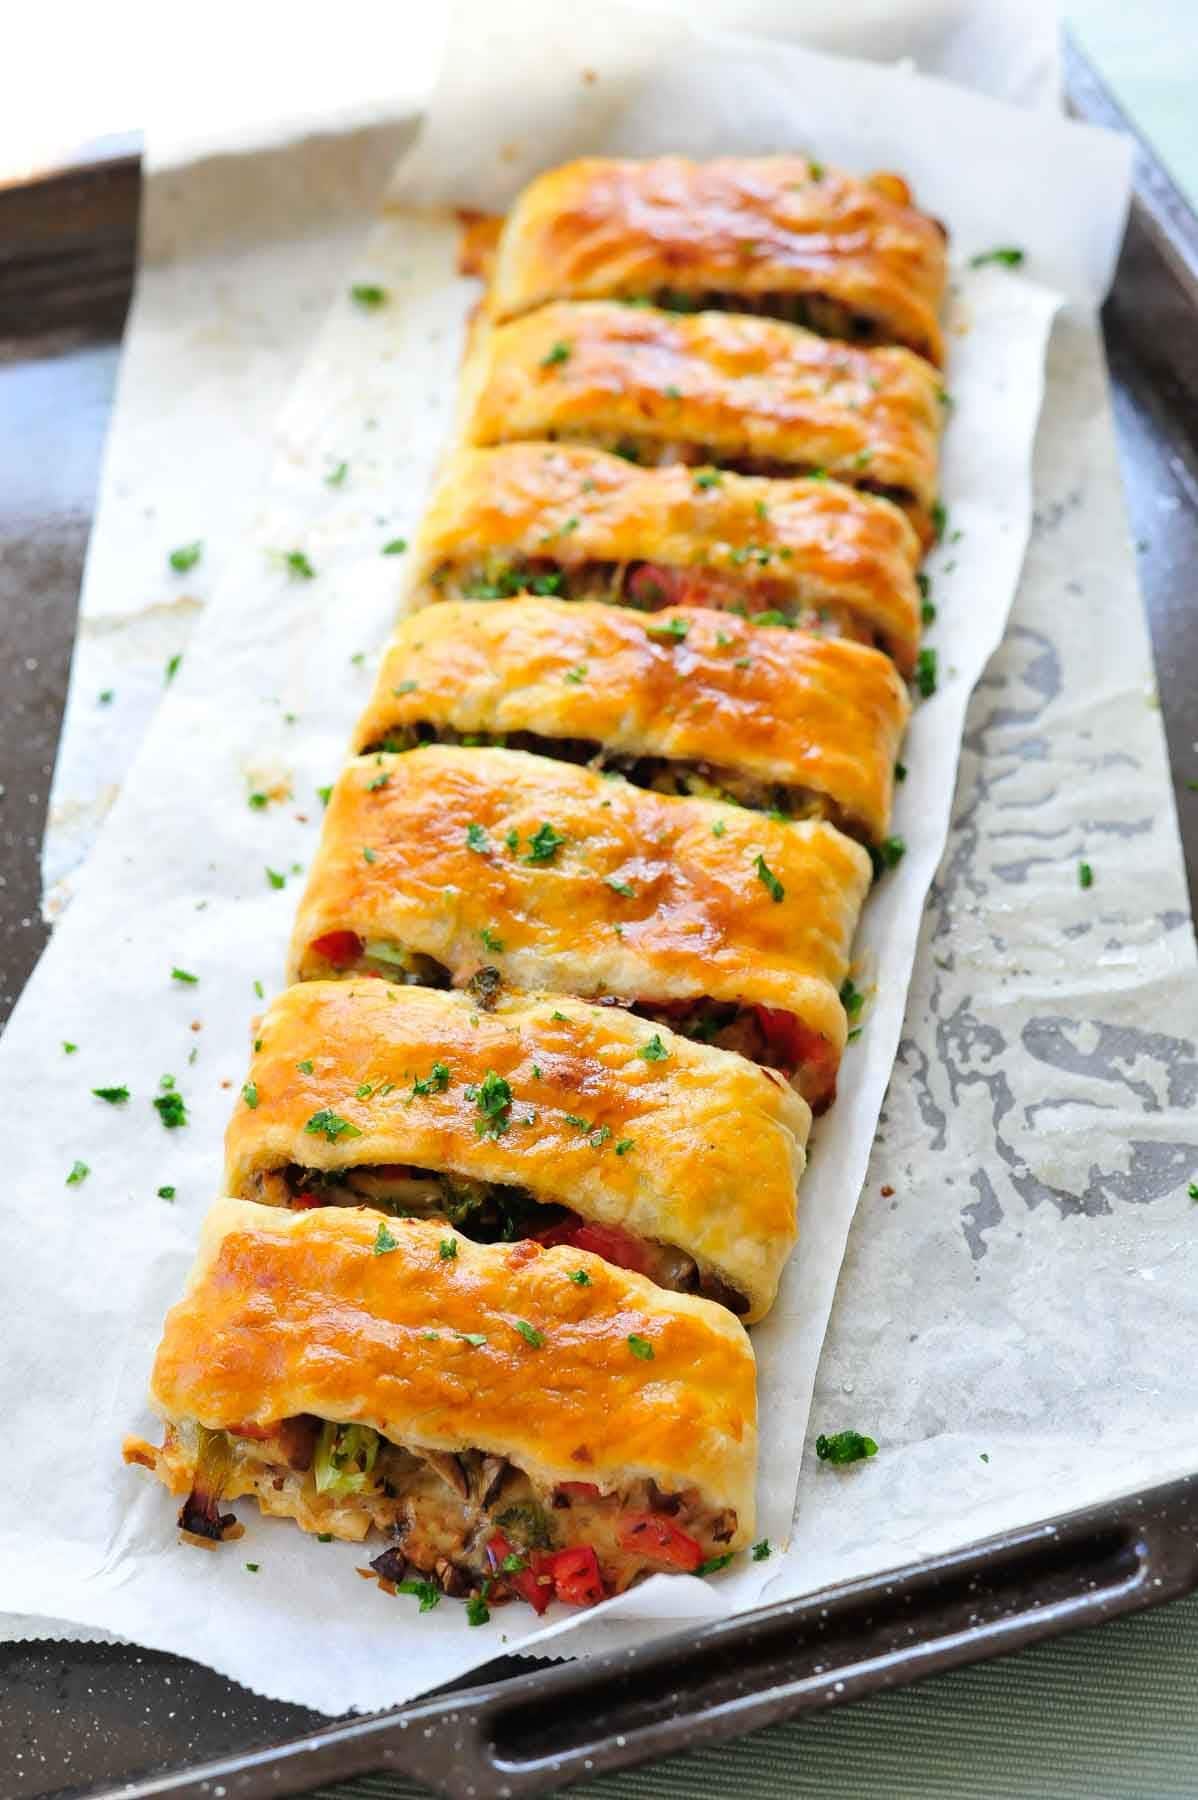 https://www.everyday-delicious.com/wp-content/uploads/2019/11/puff-pastry-strudel-with-vegetables-ciasto-francuskie-z-warzywami-everyday-delicious-1-1198x1800.jpg